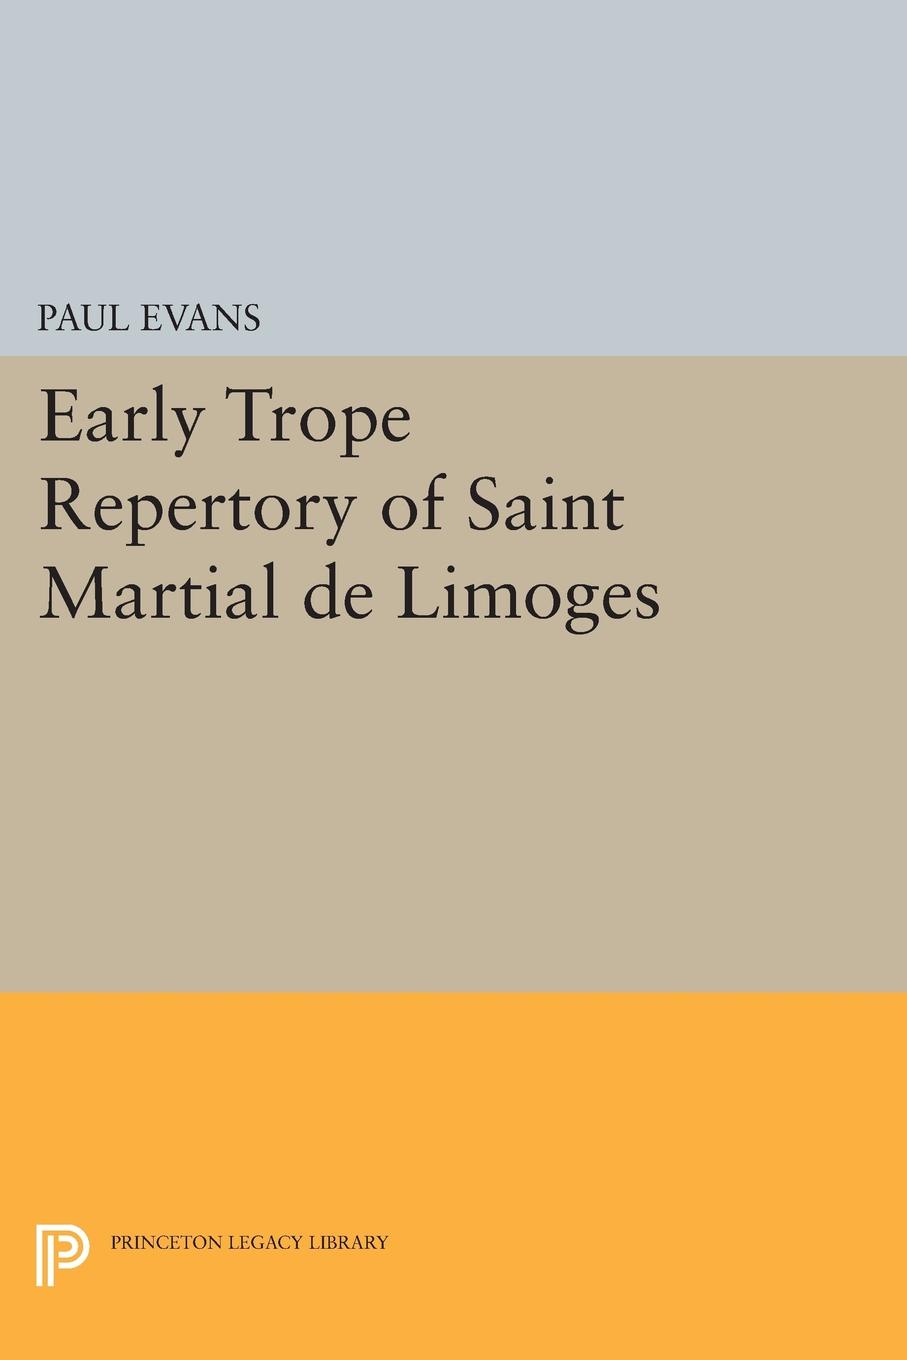 Early Trope Repertory of Saint Martial de Limoges